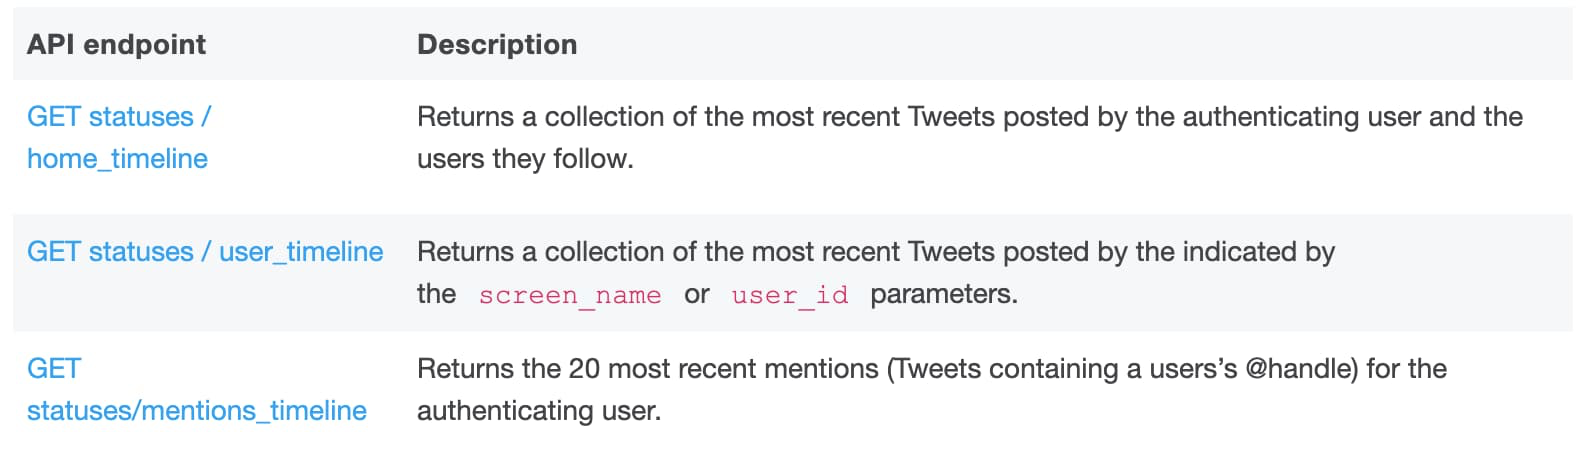 Twitter replaces its free API with a paid tier